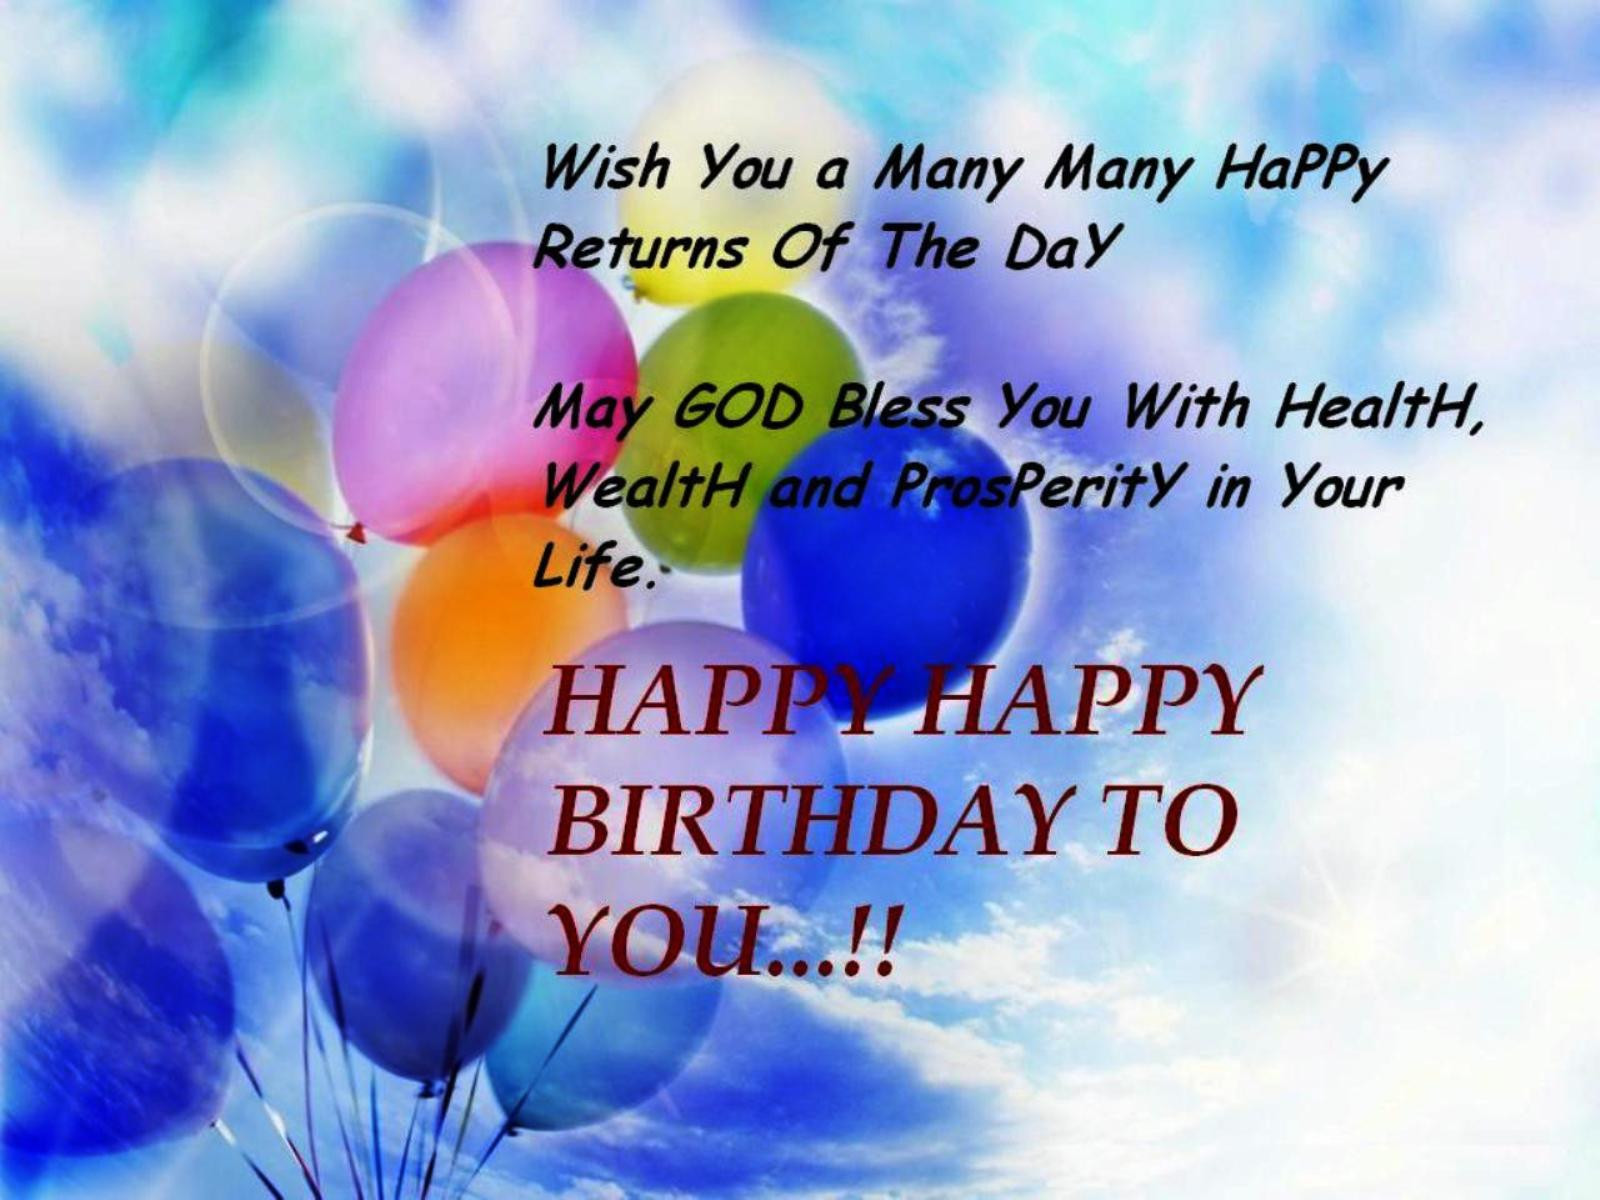 Wishing You A Happy Birthday Quotes
 50 Birthday Wishes and Messages with Quotes